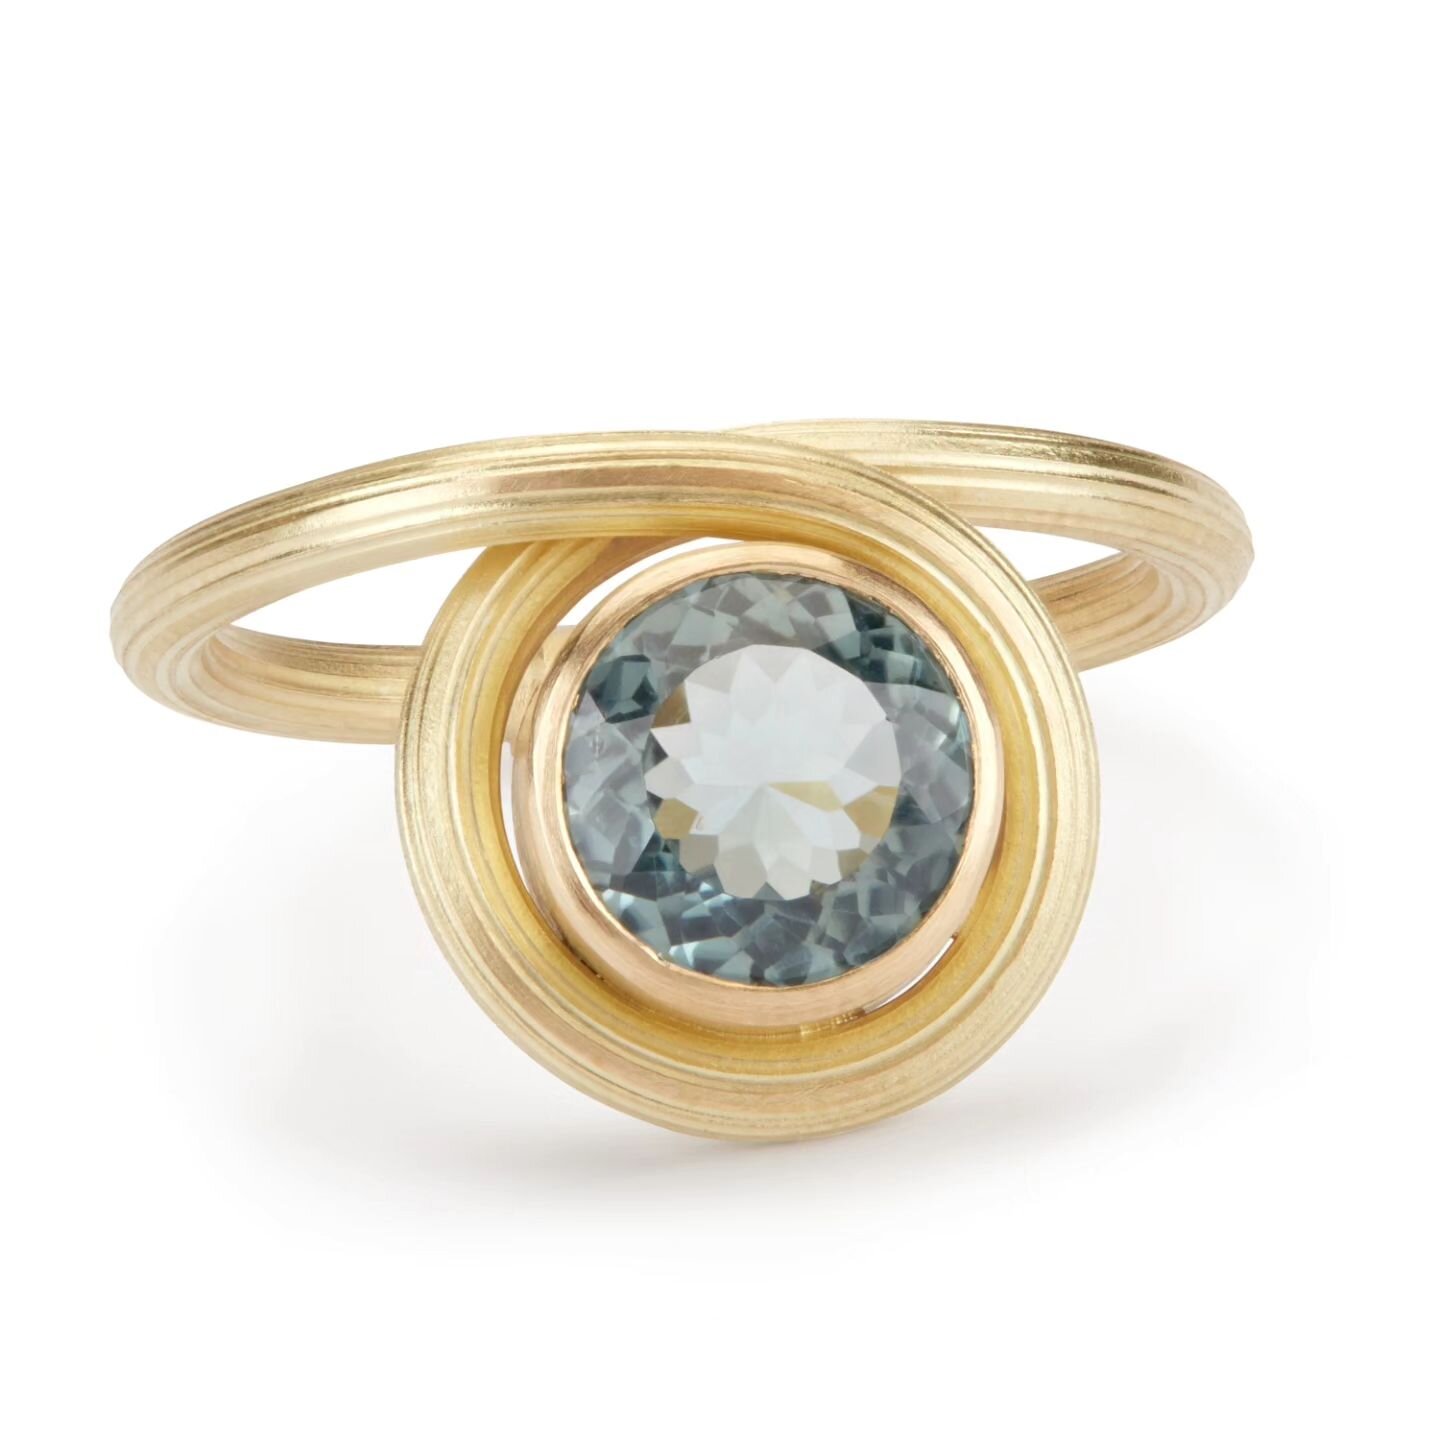 Swirl Ring was one of my new designs last year and I've been contemplating which colours I should make it in next. After a successful visit to the UK Ethical Gem Fair this week, I have some beautiful ethically sources tourmalines for my next editions